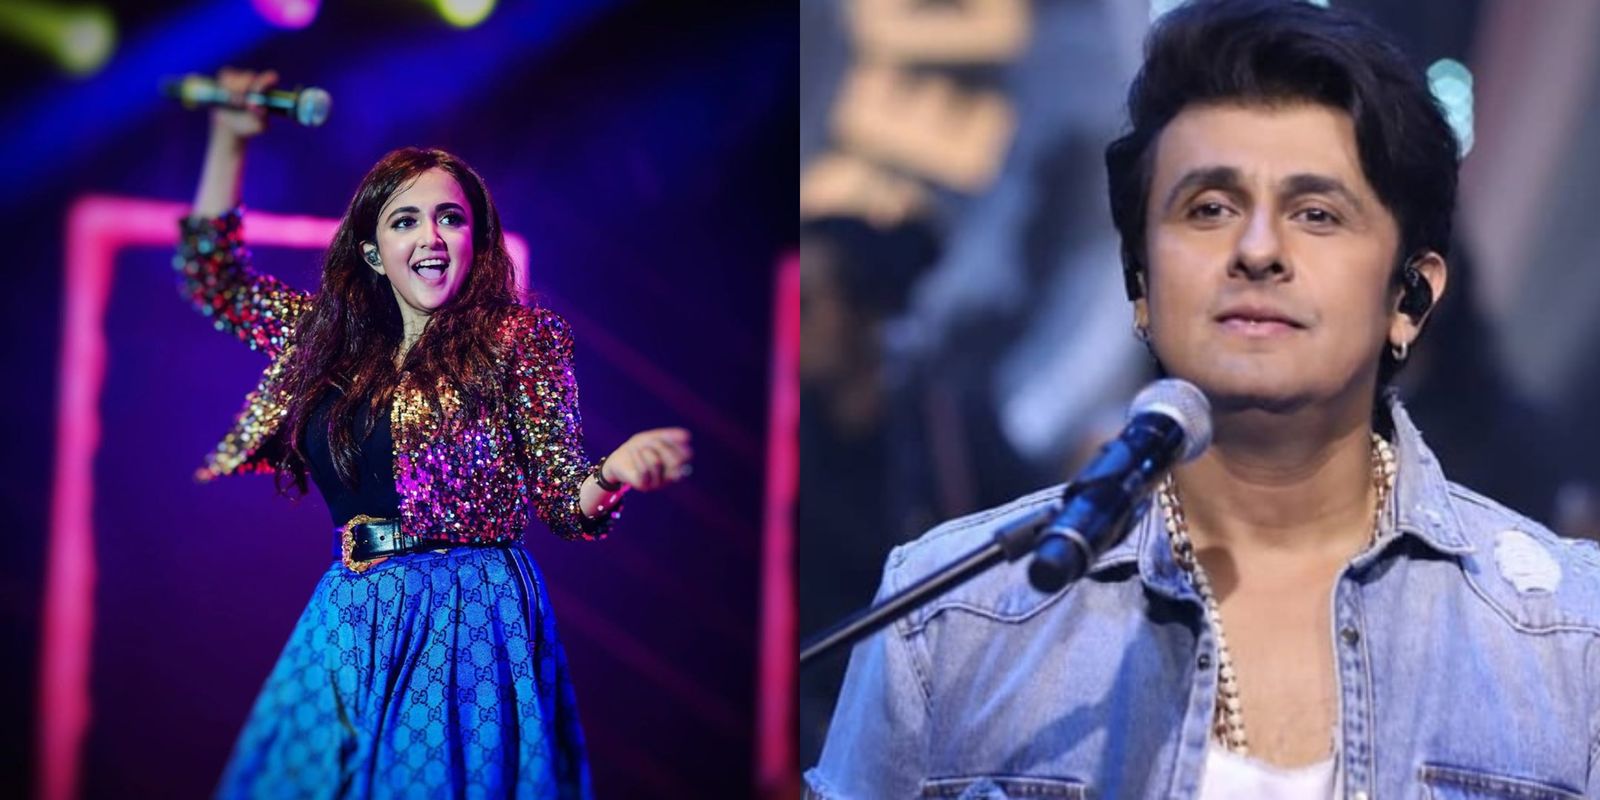 Singer Monali Thakur Lauds Sonu Nigam For Speaking Out Against Music Labels, Says They Promote Mediocre Talent